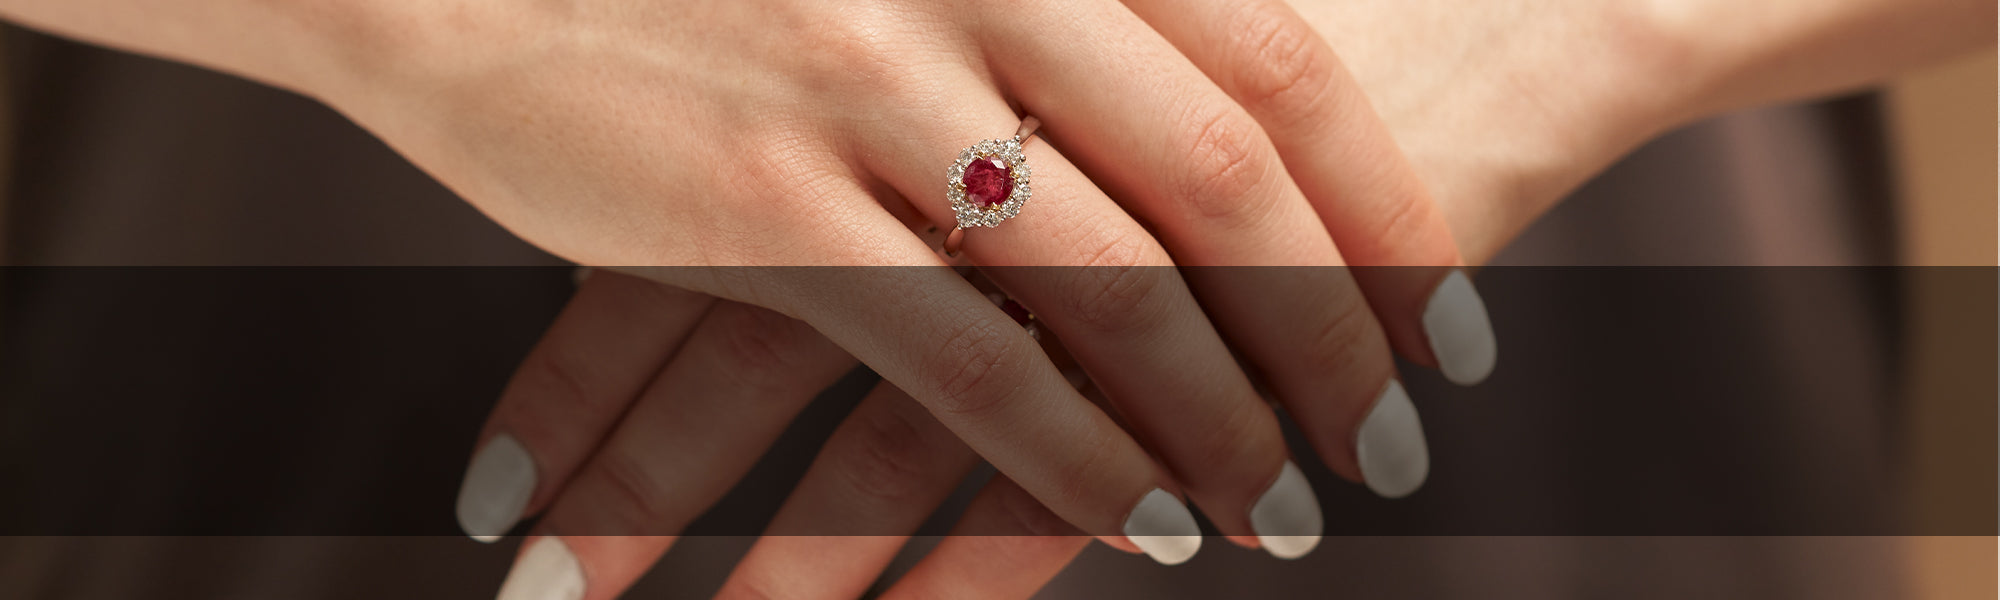 Woman Wearing Red Emerald Ring by Park City Jewelers